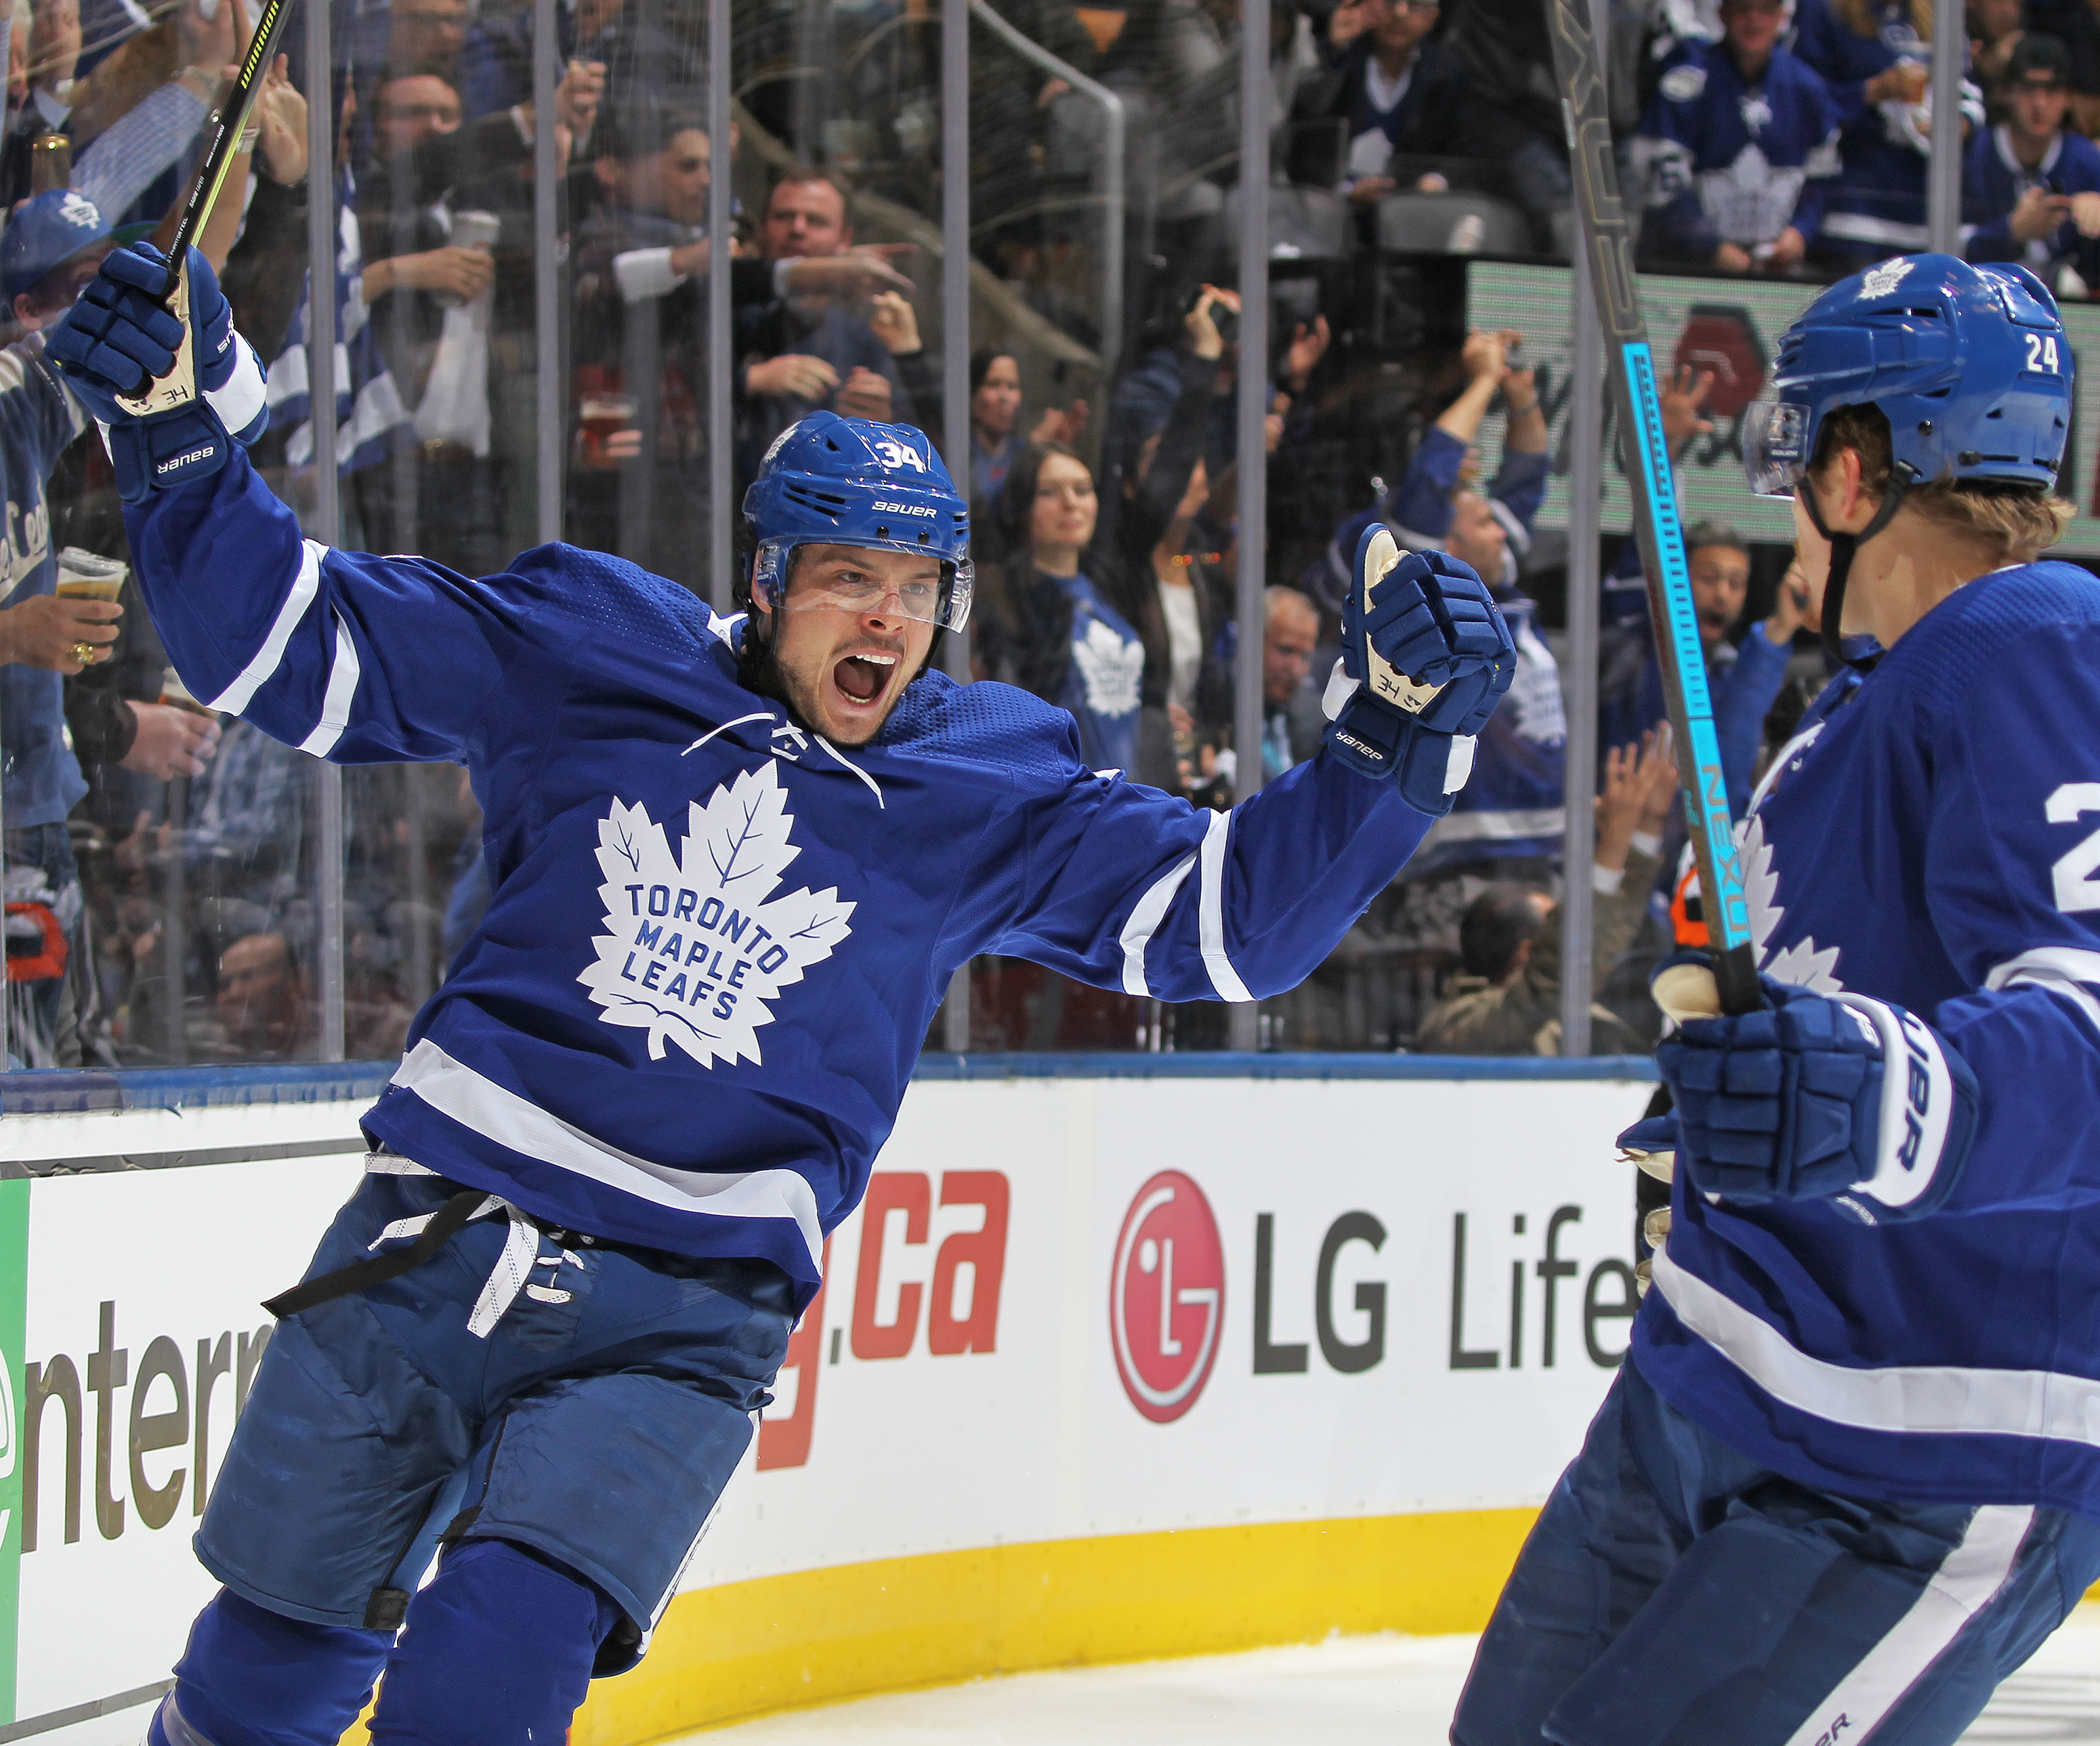 Ranking the Maple Leafs' alternate jerseys from worst to best